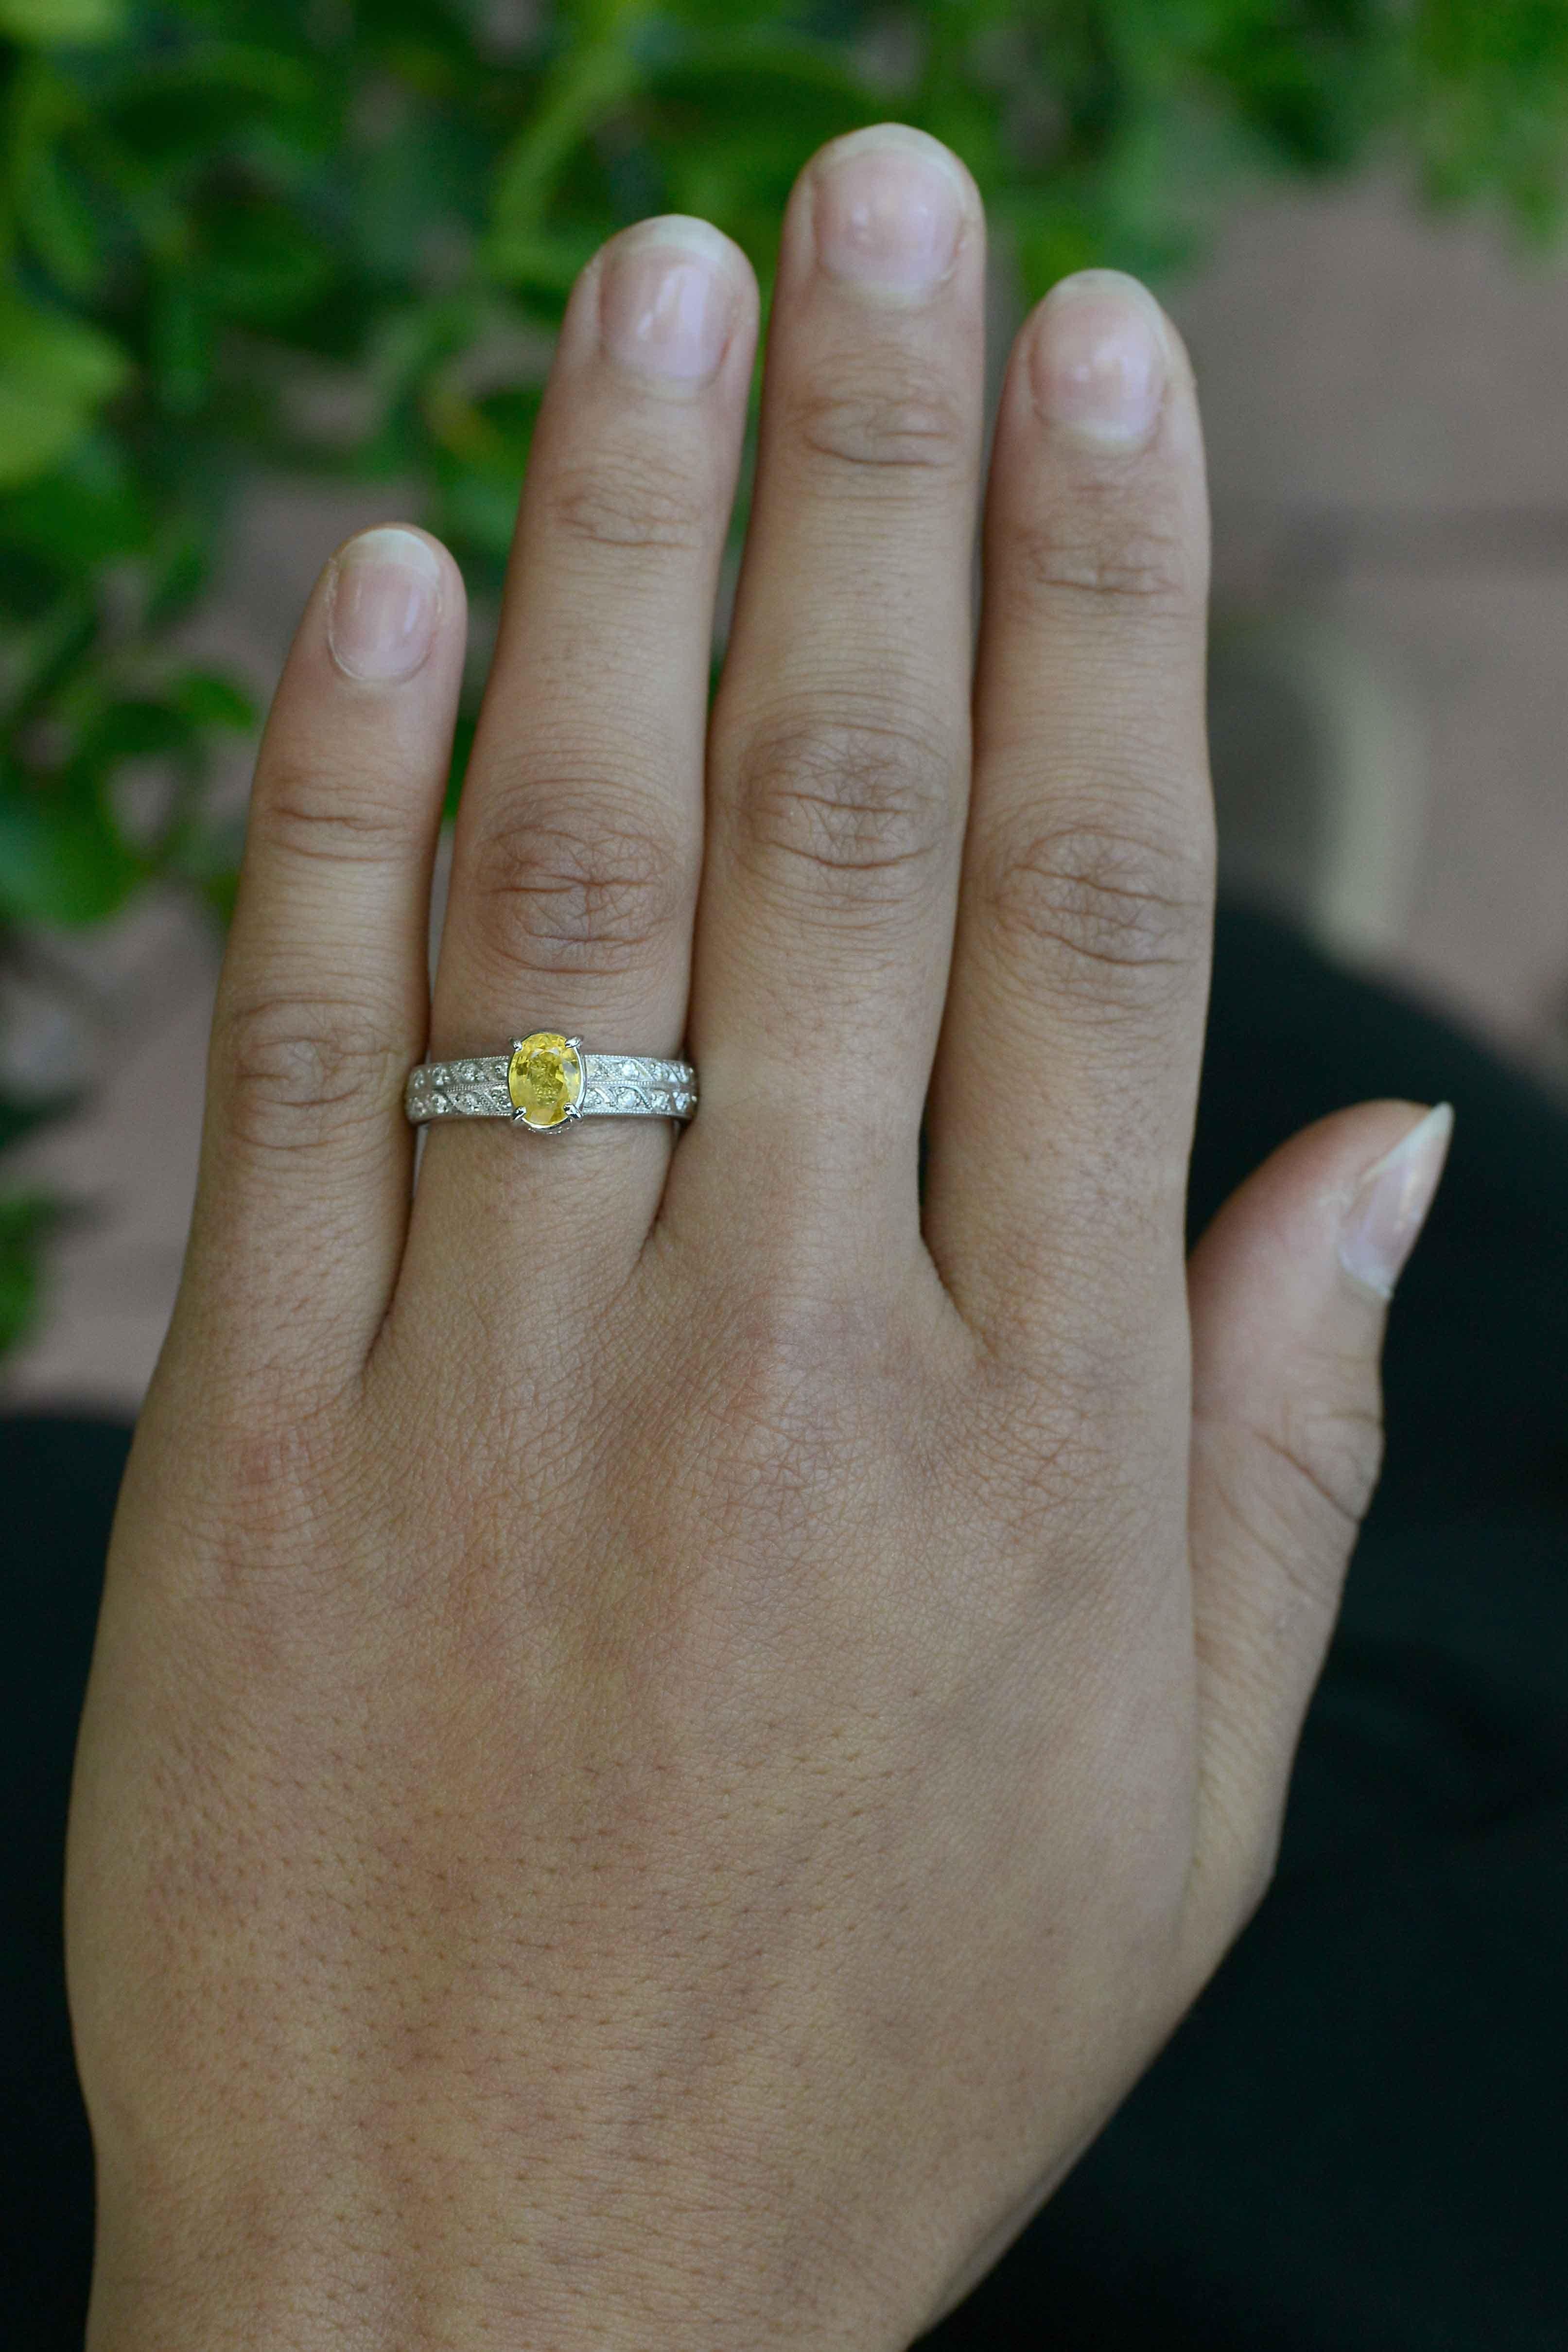 The Pueblo yellow sapphire engagement ring. An eminently wearable oval solitaire gemstone with a bright, lively canary yellow sapphire is really brought to life with a substantial 2 row diamond band and crown setting. Worn as a stacking ring, really